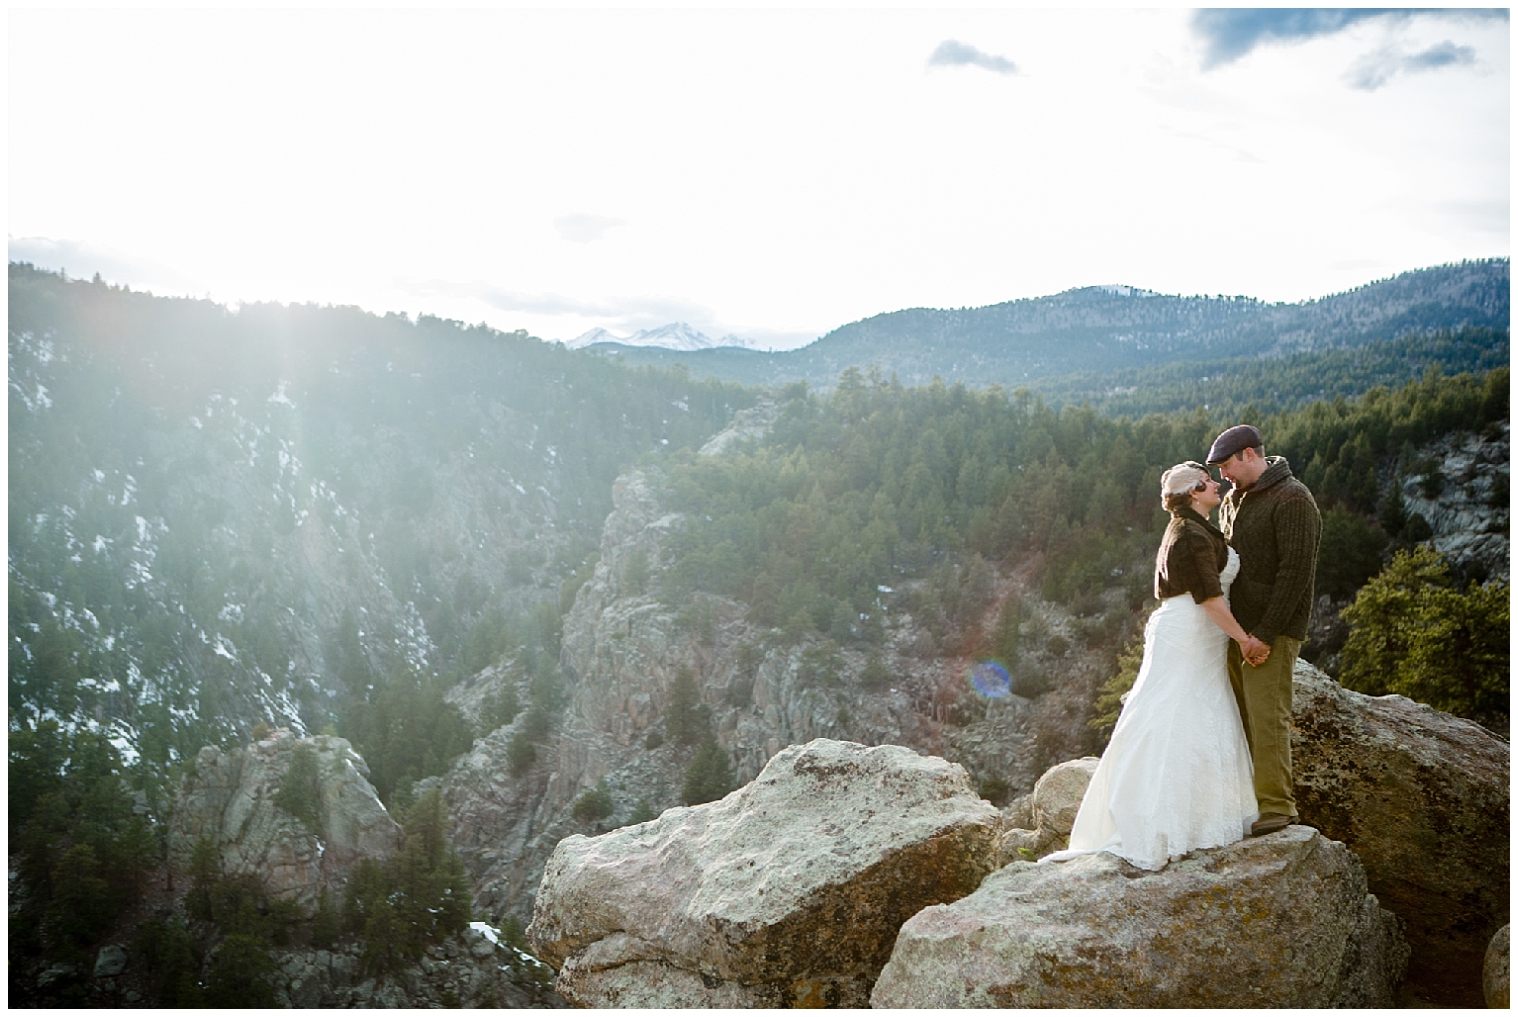 The wedding couple stand together in the mountains at their Boulder Colorado elopement.